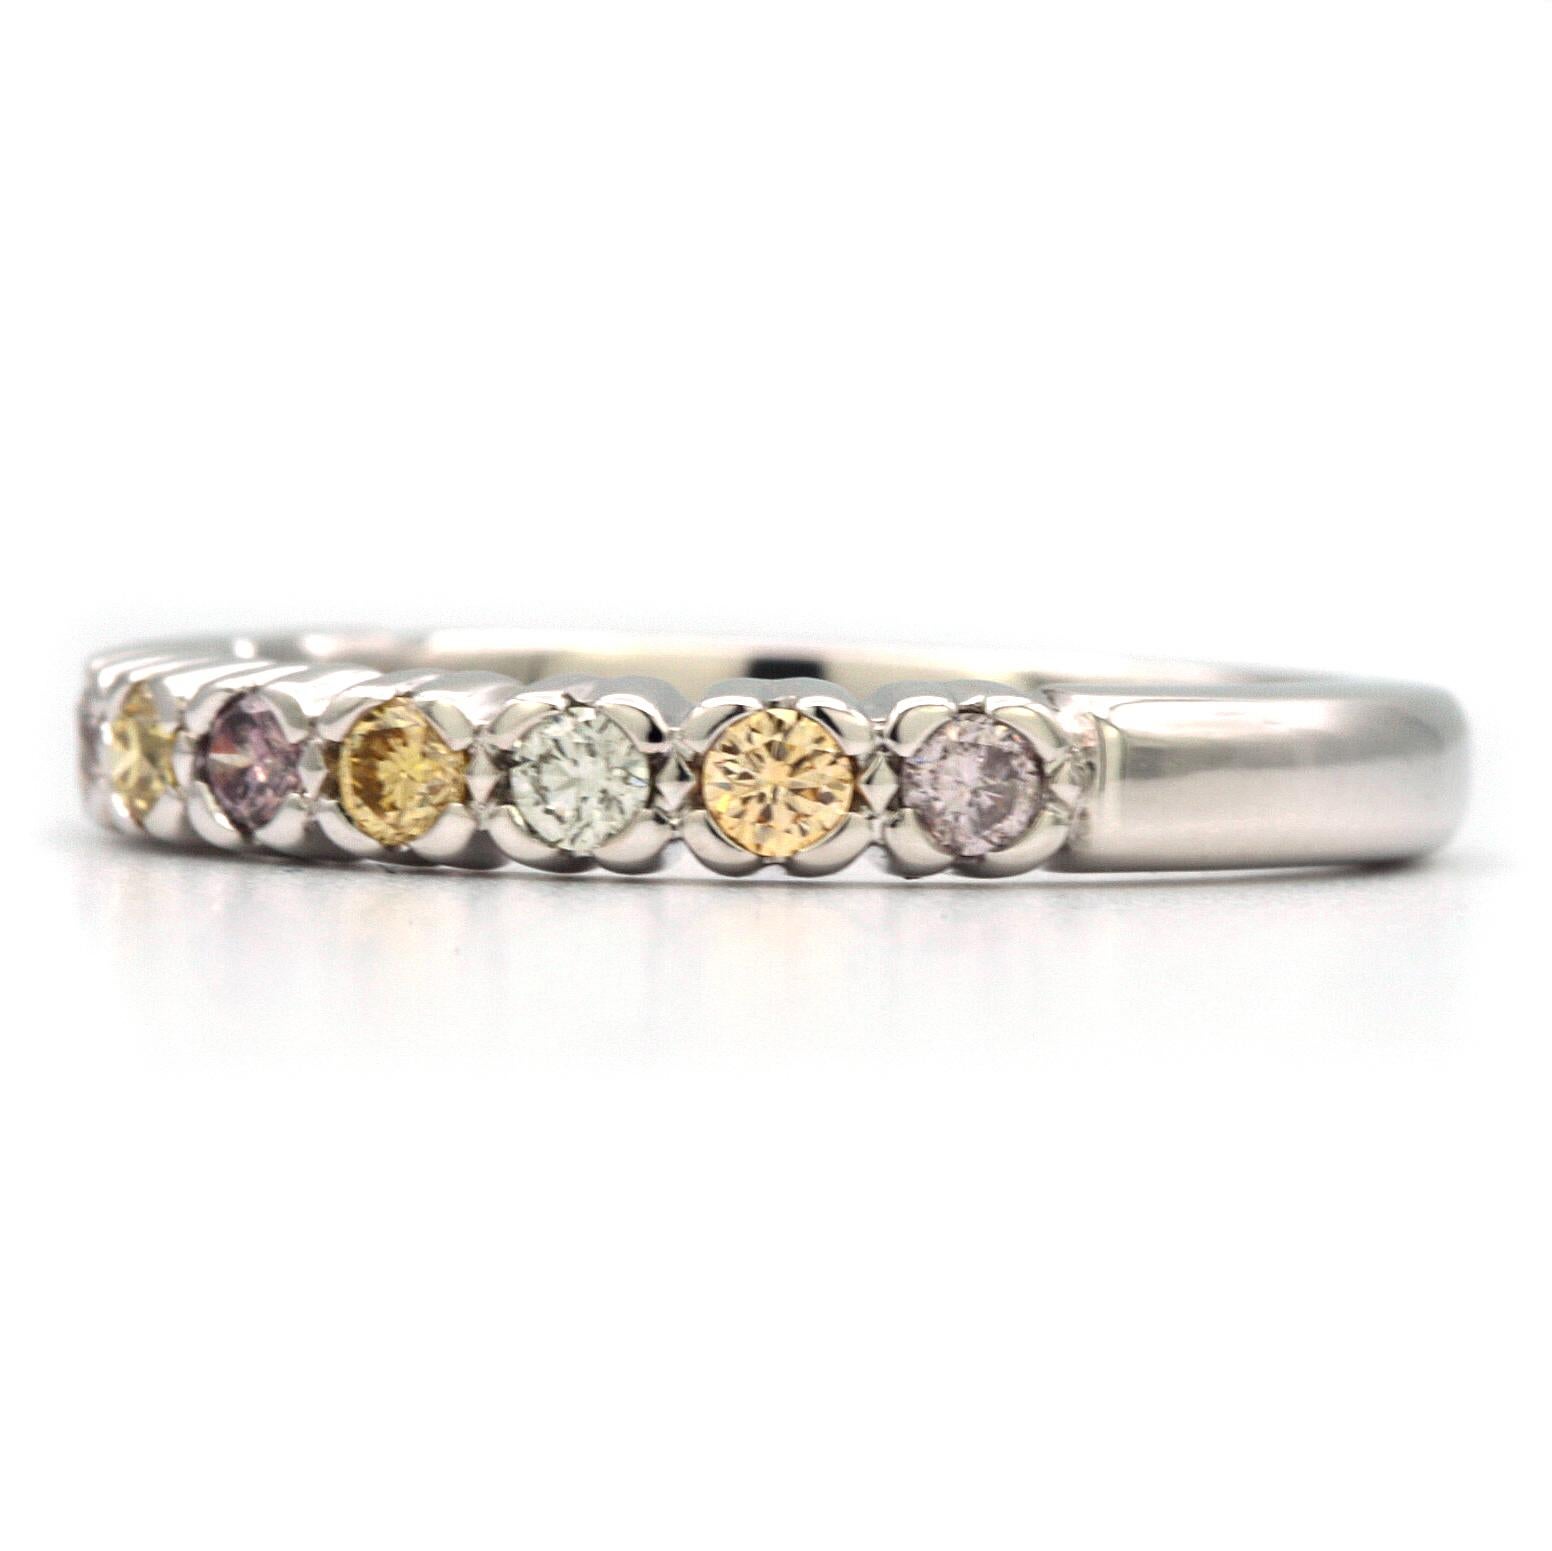 This elegant band contains 10 Natural Diamonds, 3 are very light purple, 4 fancy light yellow, 1 fancy intense purple, and 2 very light green. 
Can be worn alone or stacked with more rings!
All stones are approximately SI2/SI1 Clarity with good